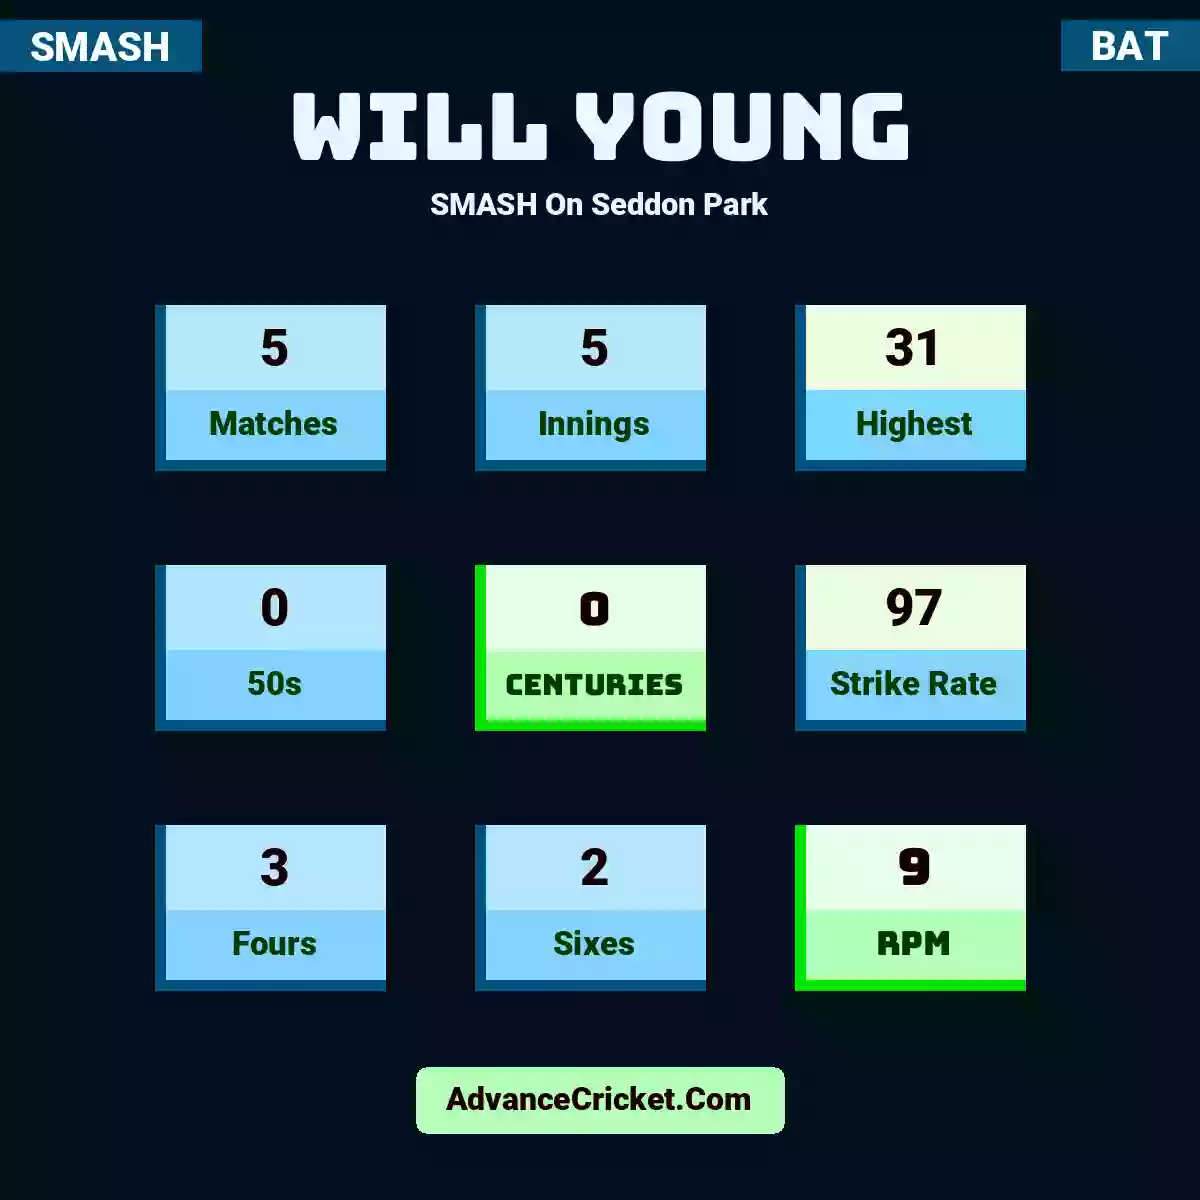 Will Young SMASH  On Seddon Park, Will Young played 5 matches, scored 31 runs as highest, 0 half-centuries, and 0 centuries, with a strike rate of 97. W.Young hit 3 fours and 2 sixes, with an RPM of 9.